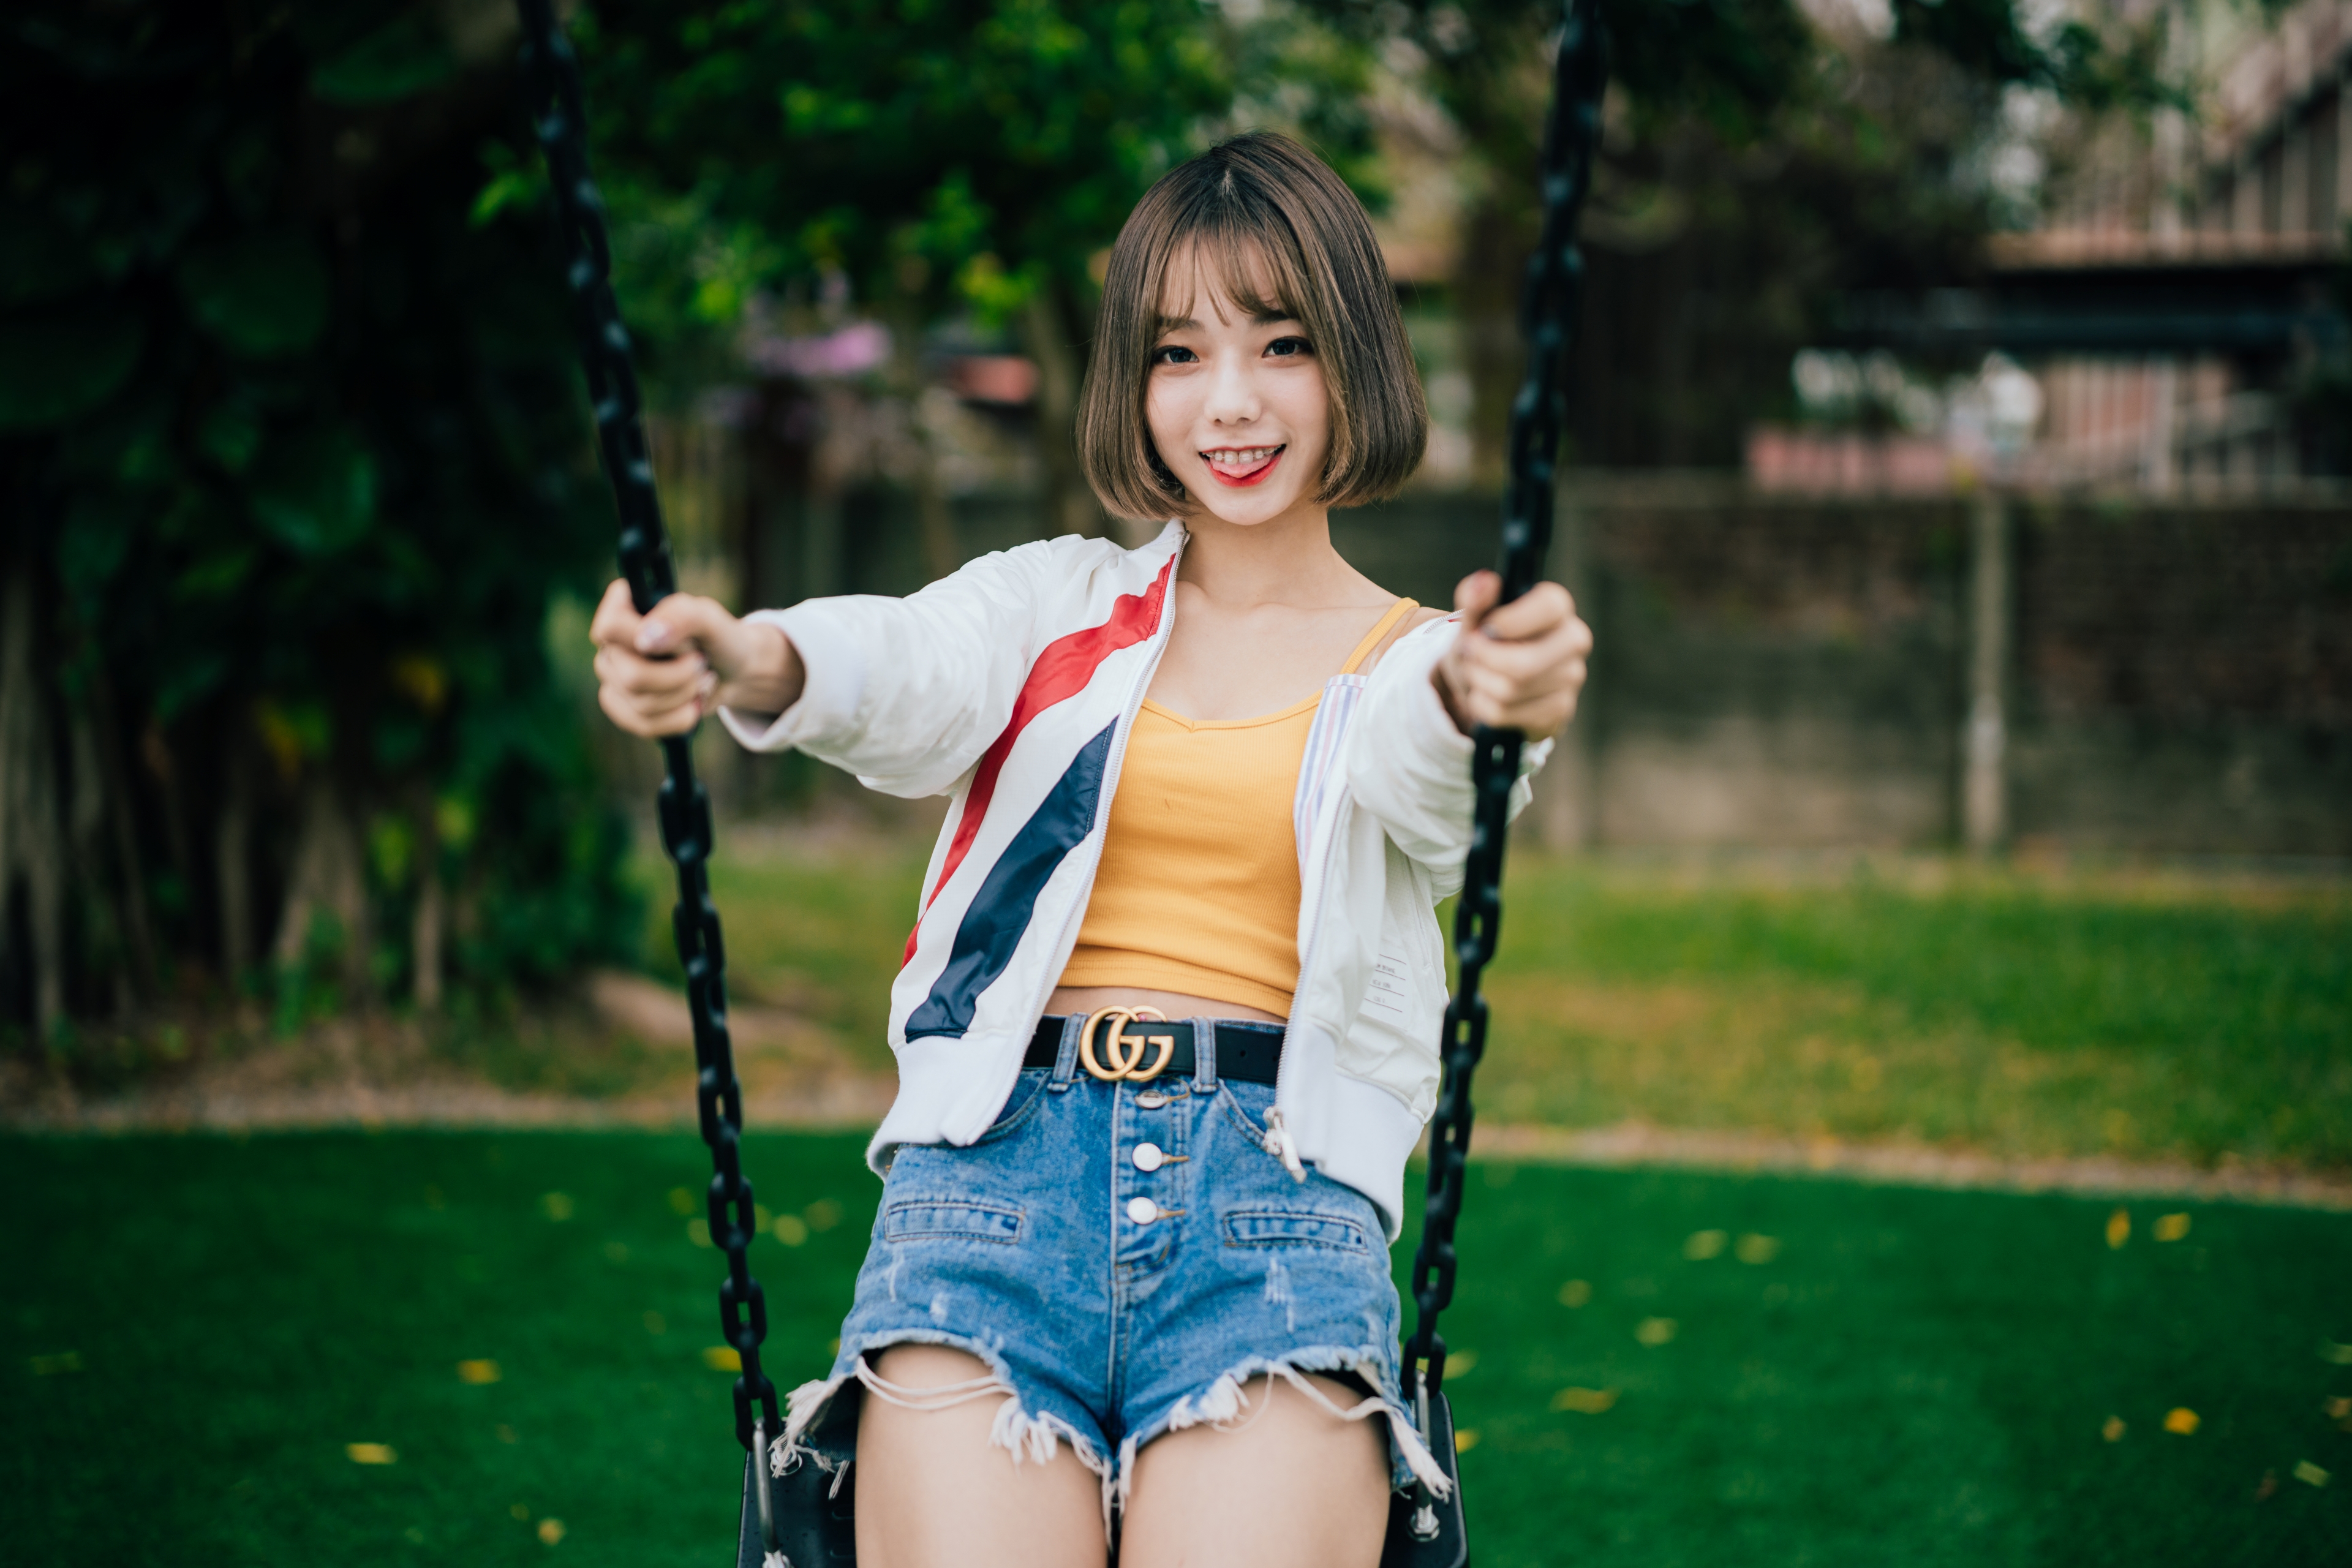 Women Model Asian Looking At Viewer Smiling Braces Yellow Tops Jacket Torn Clothes Sitting Swings De 3840x2560